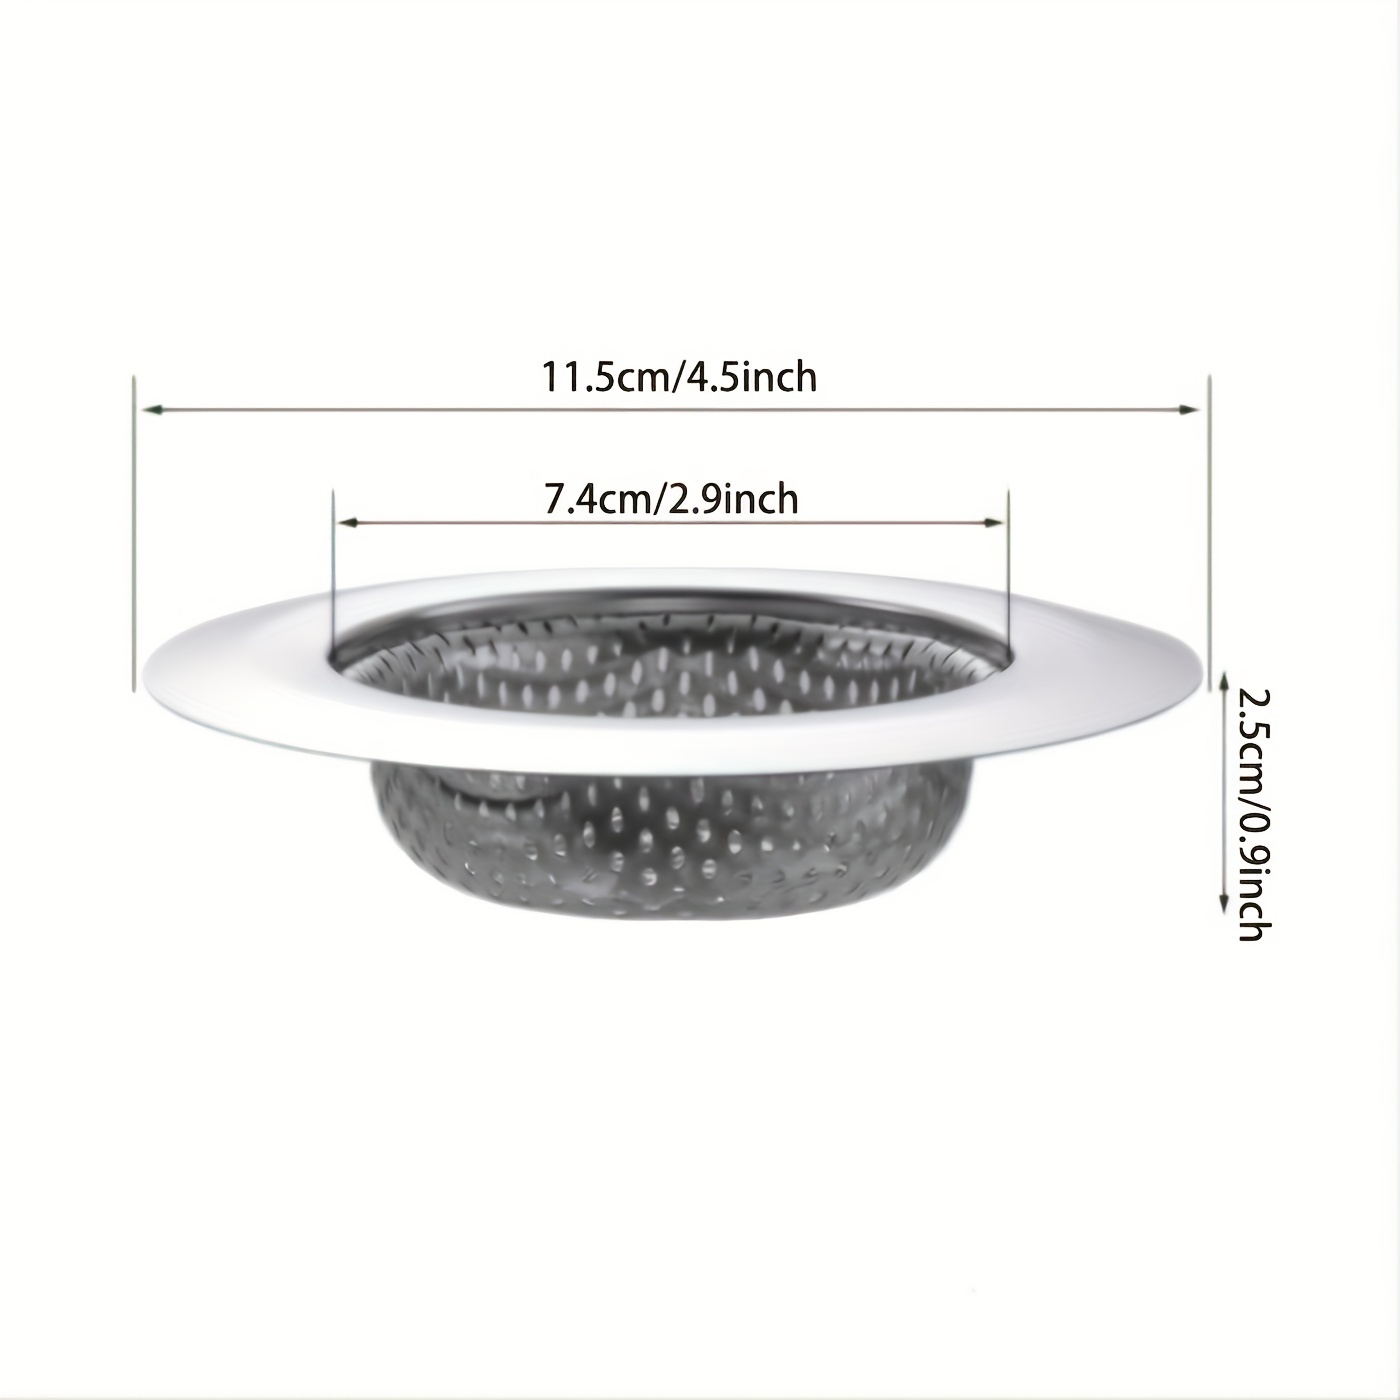 Stainless Steel Round Sink Floor Drain Strainer Cover 5 Inch Dia 2pcs